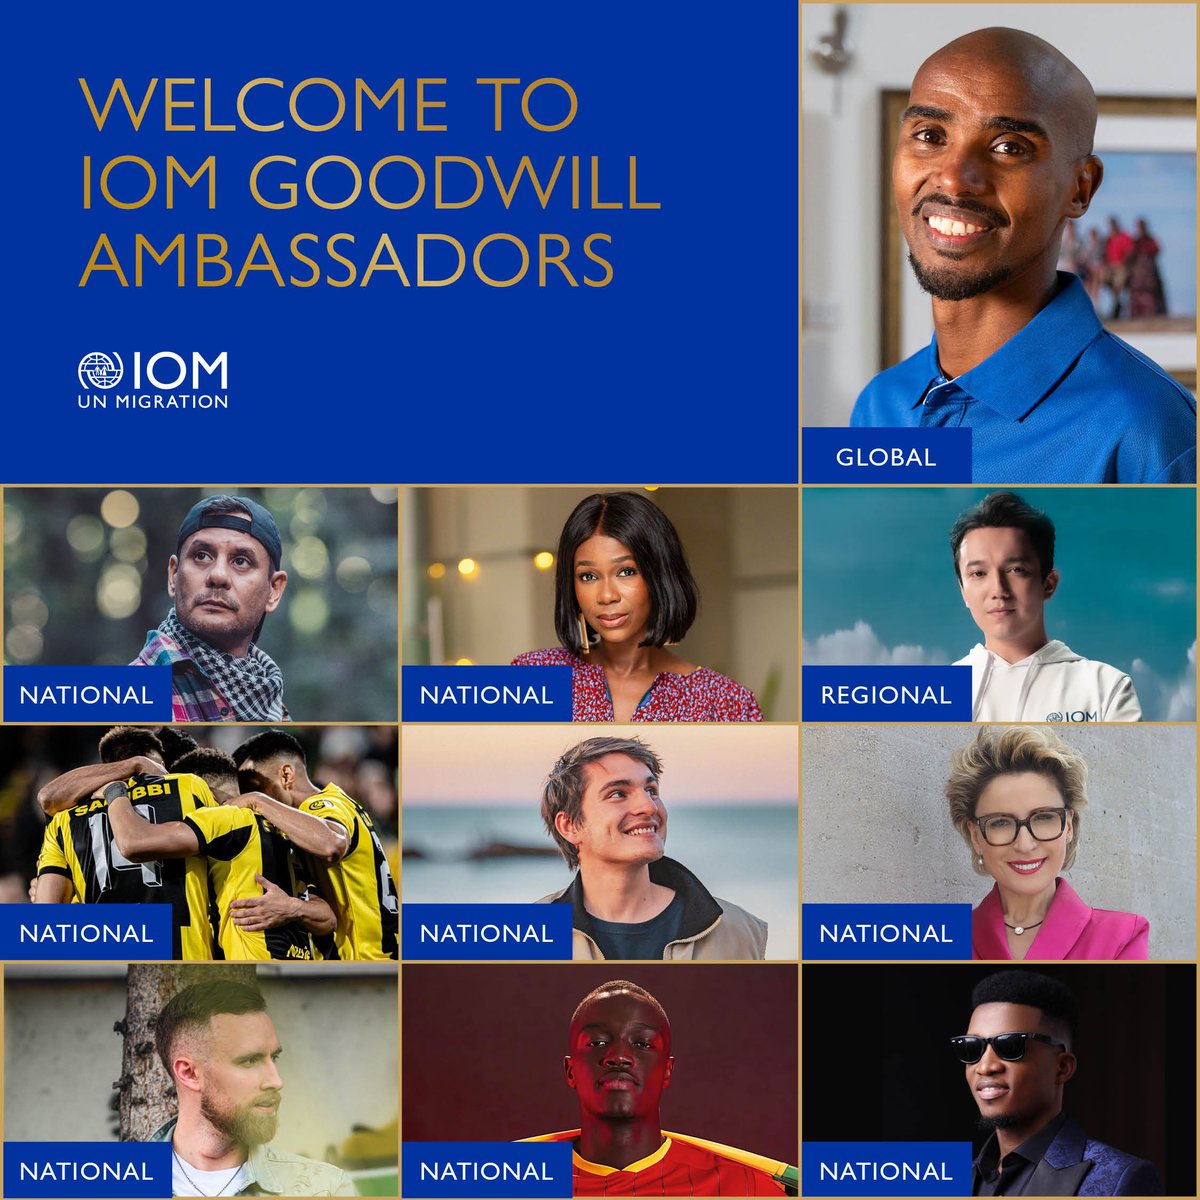 In every walk of life, these exceptional individuals have excelled through sheer courage and determination. Together with our #IOMGoodwillAmbassador, we will extend this courage to all migrants worldwide. I am happy for this collaboration and look forward to working together!